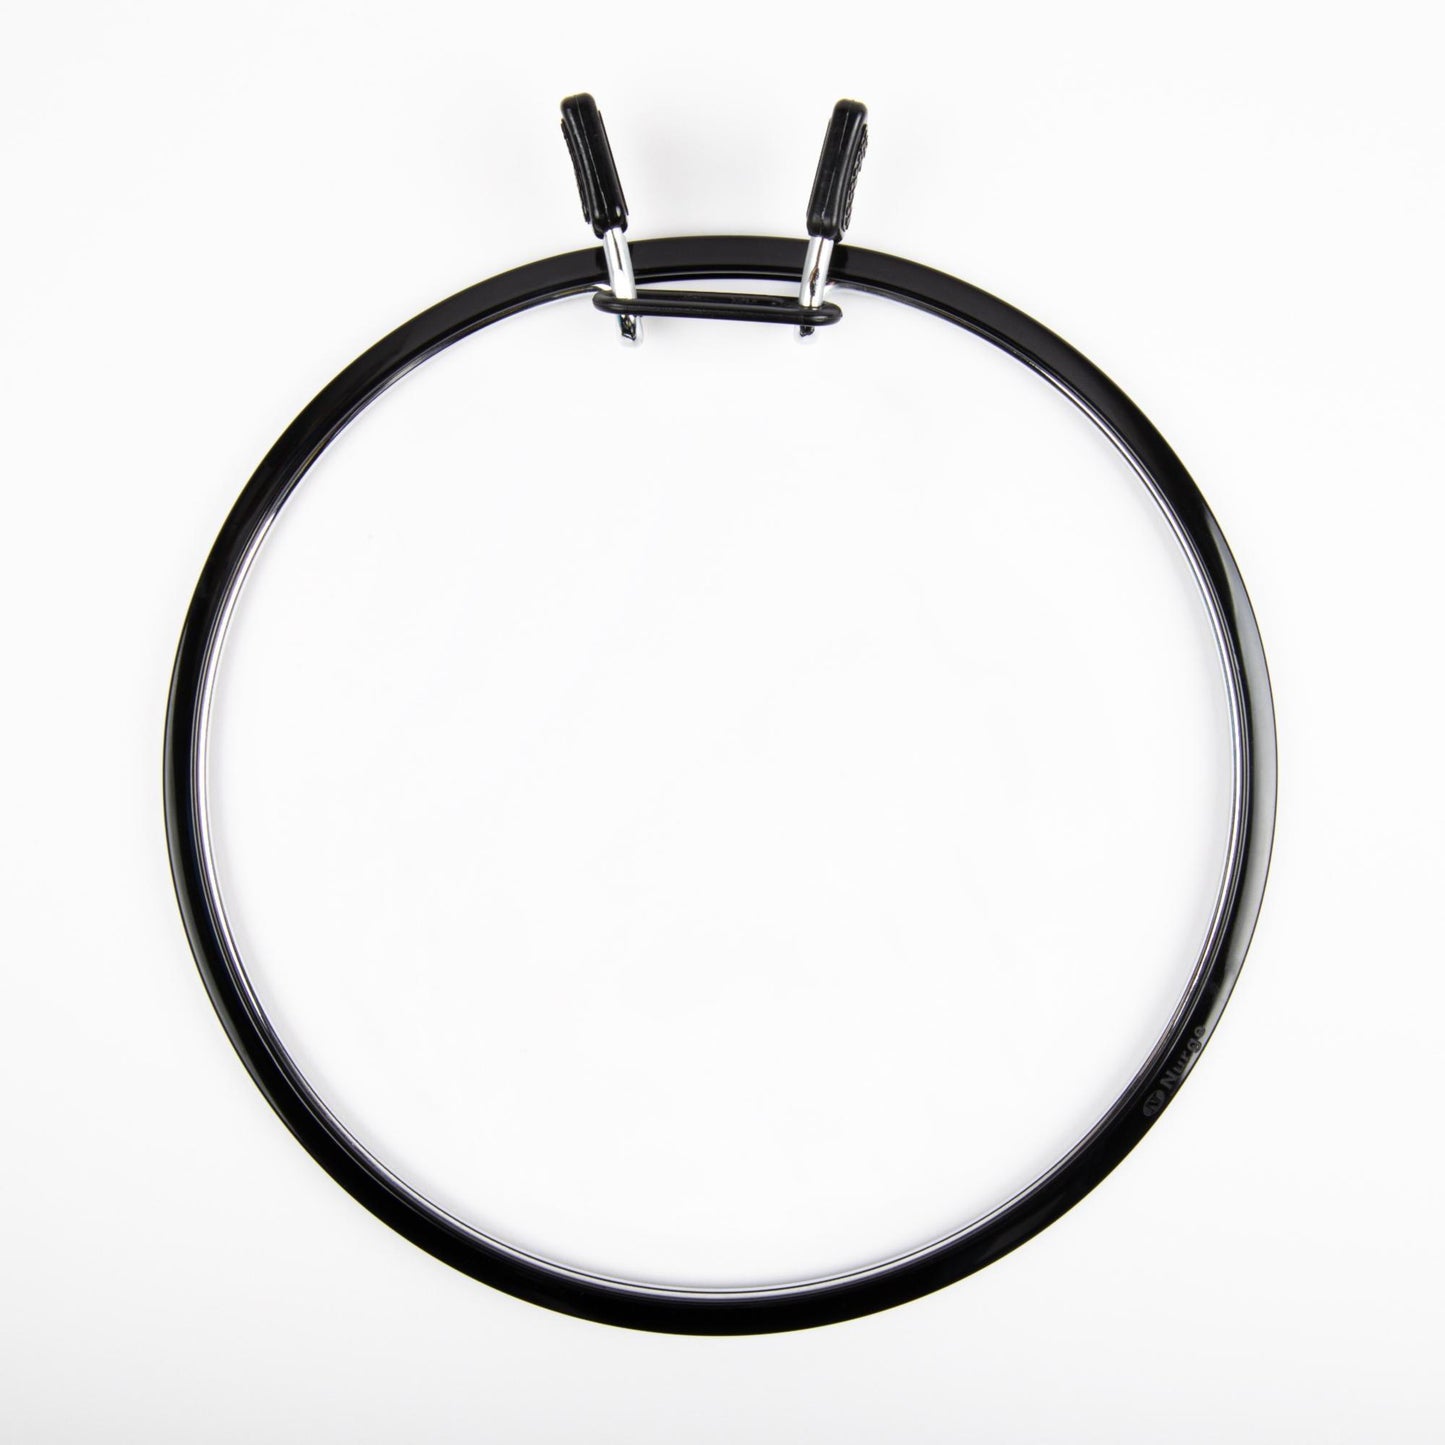 Nurge Spring Tension Hoop for Embroidery or Sewing